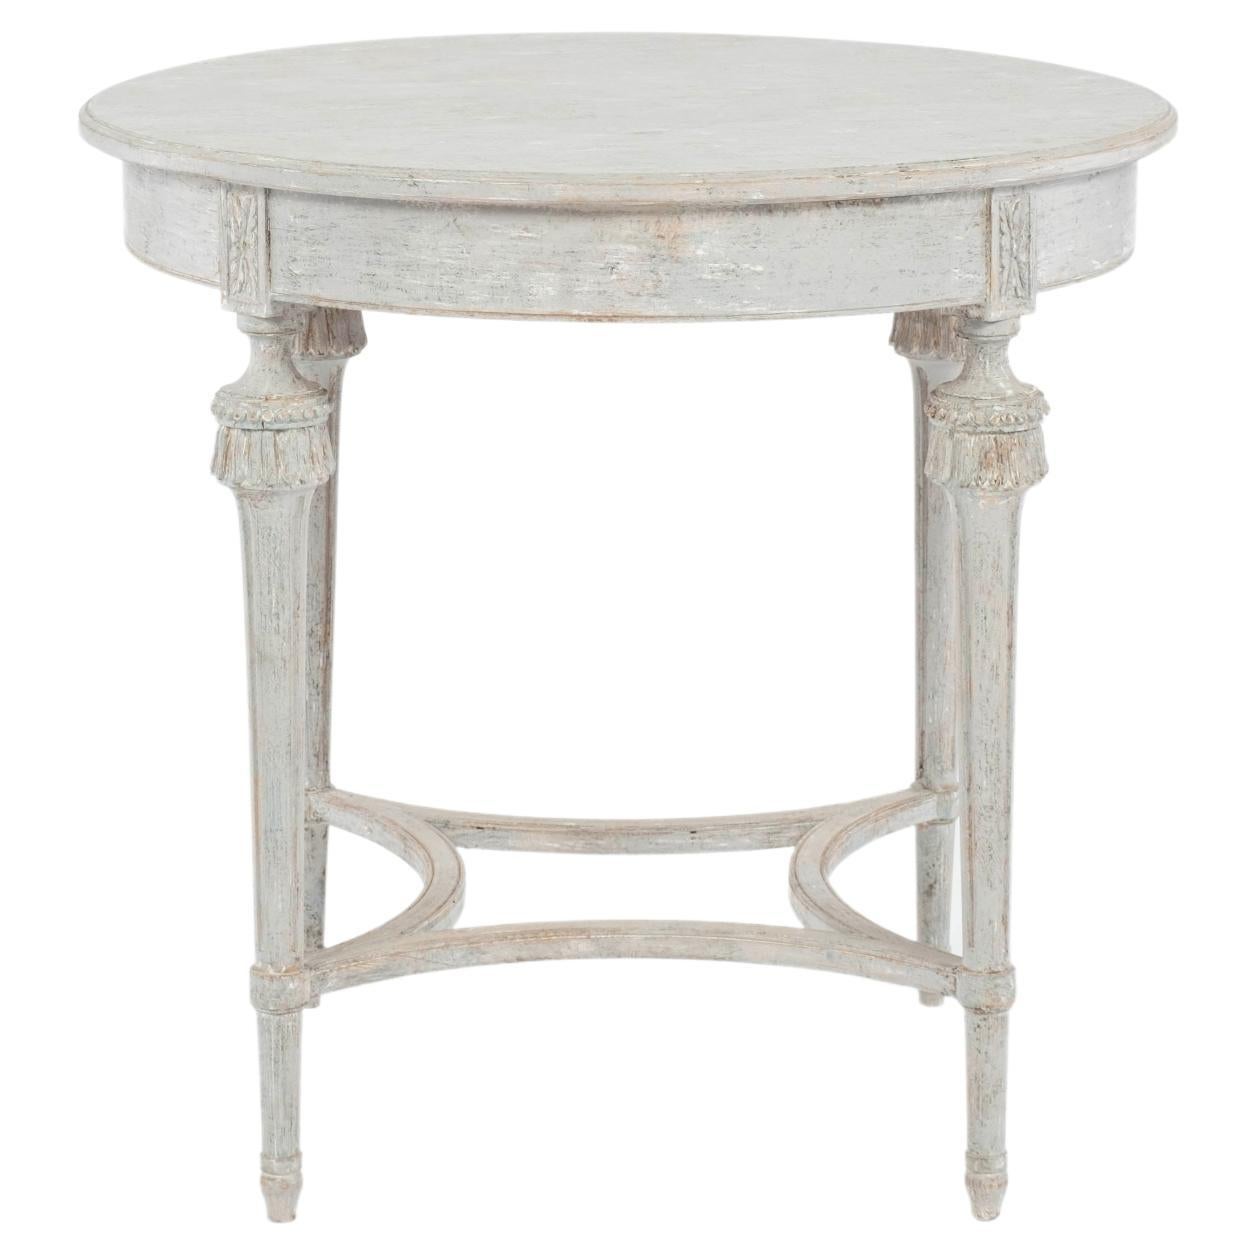 19th C. Gustavian Round Table For Sale